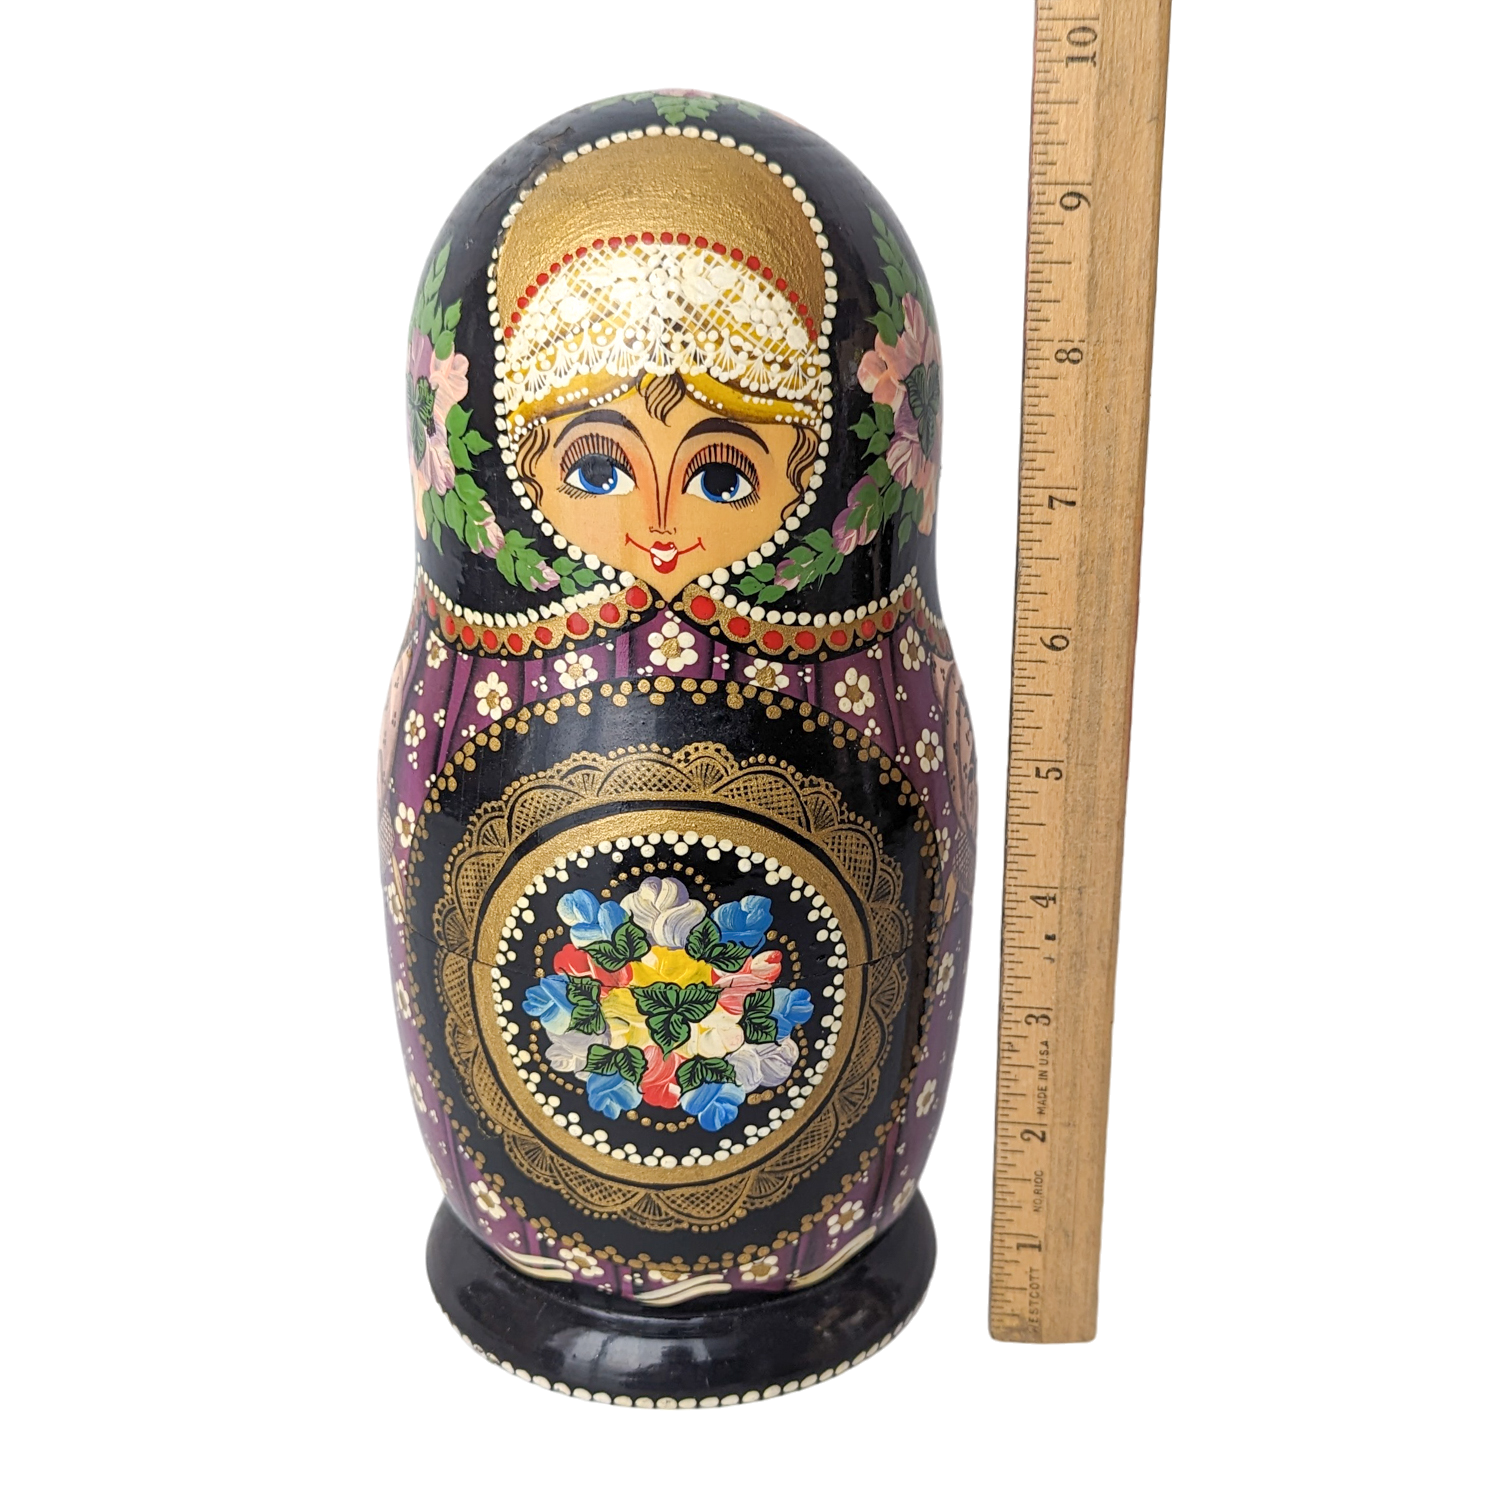 Hand Painted Russian 10 Piece Nesting Doll